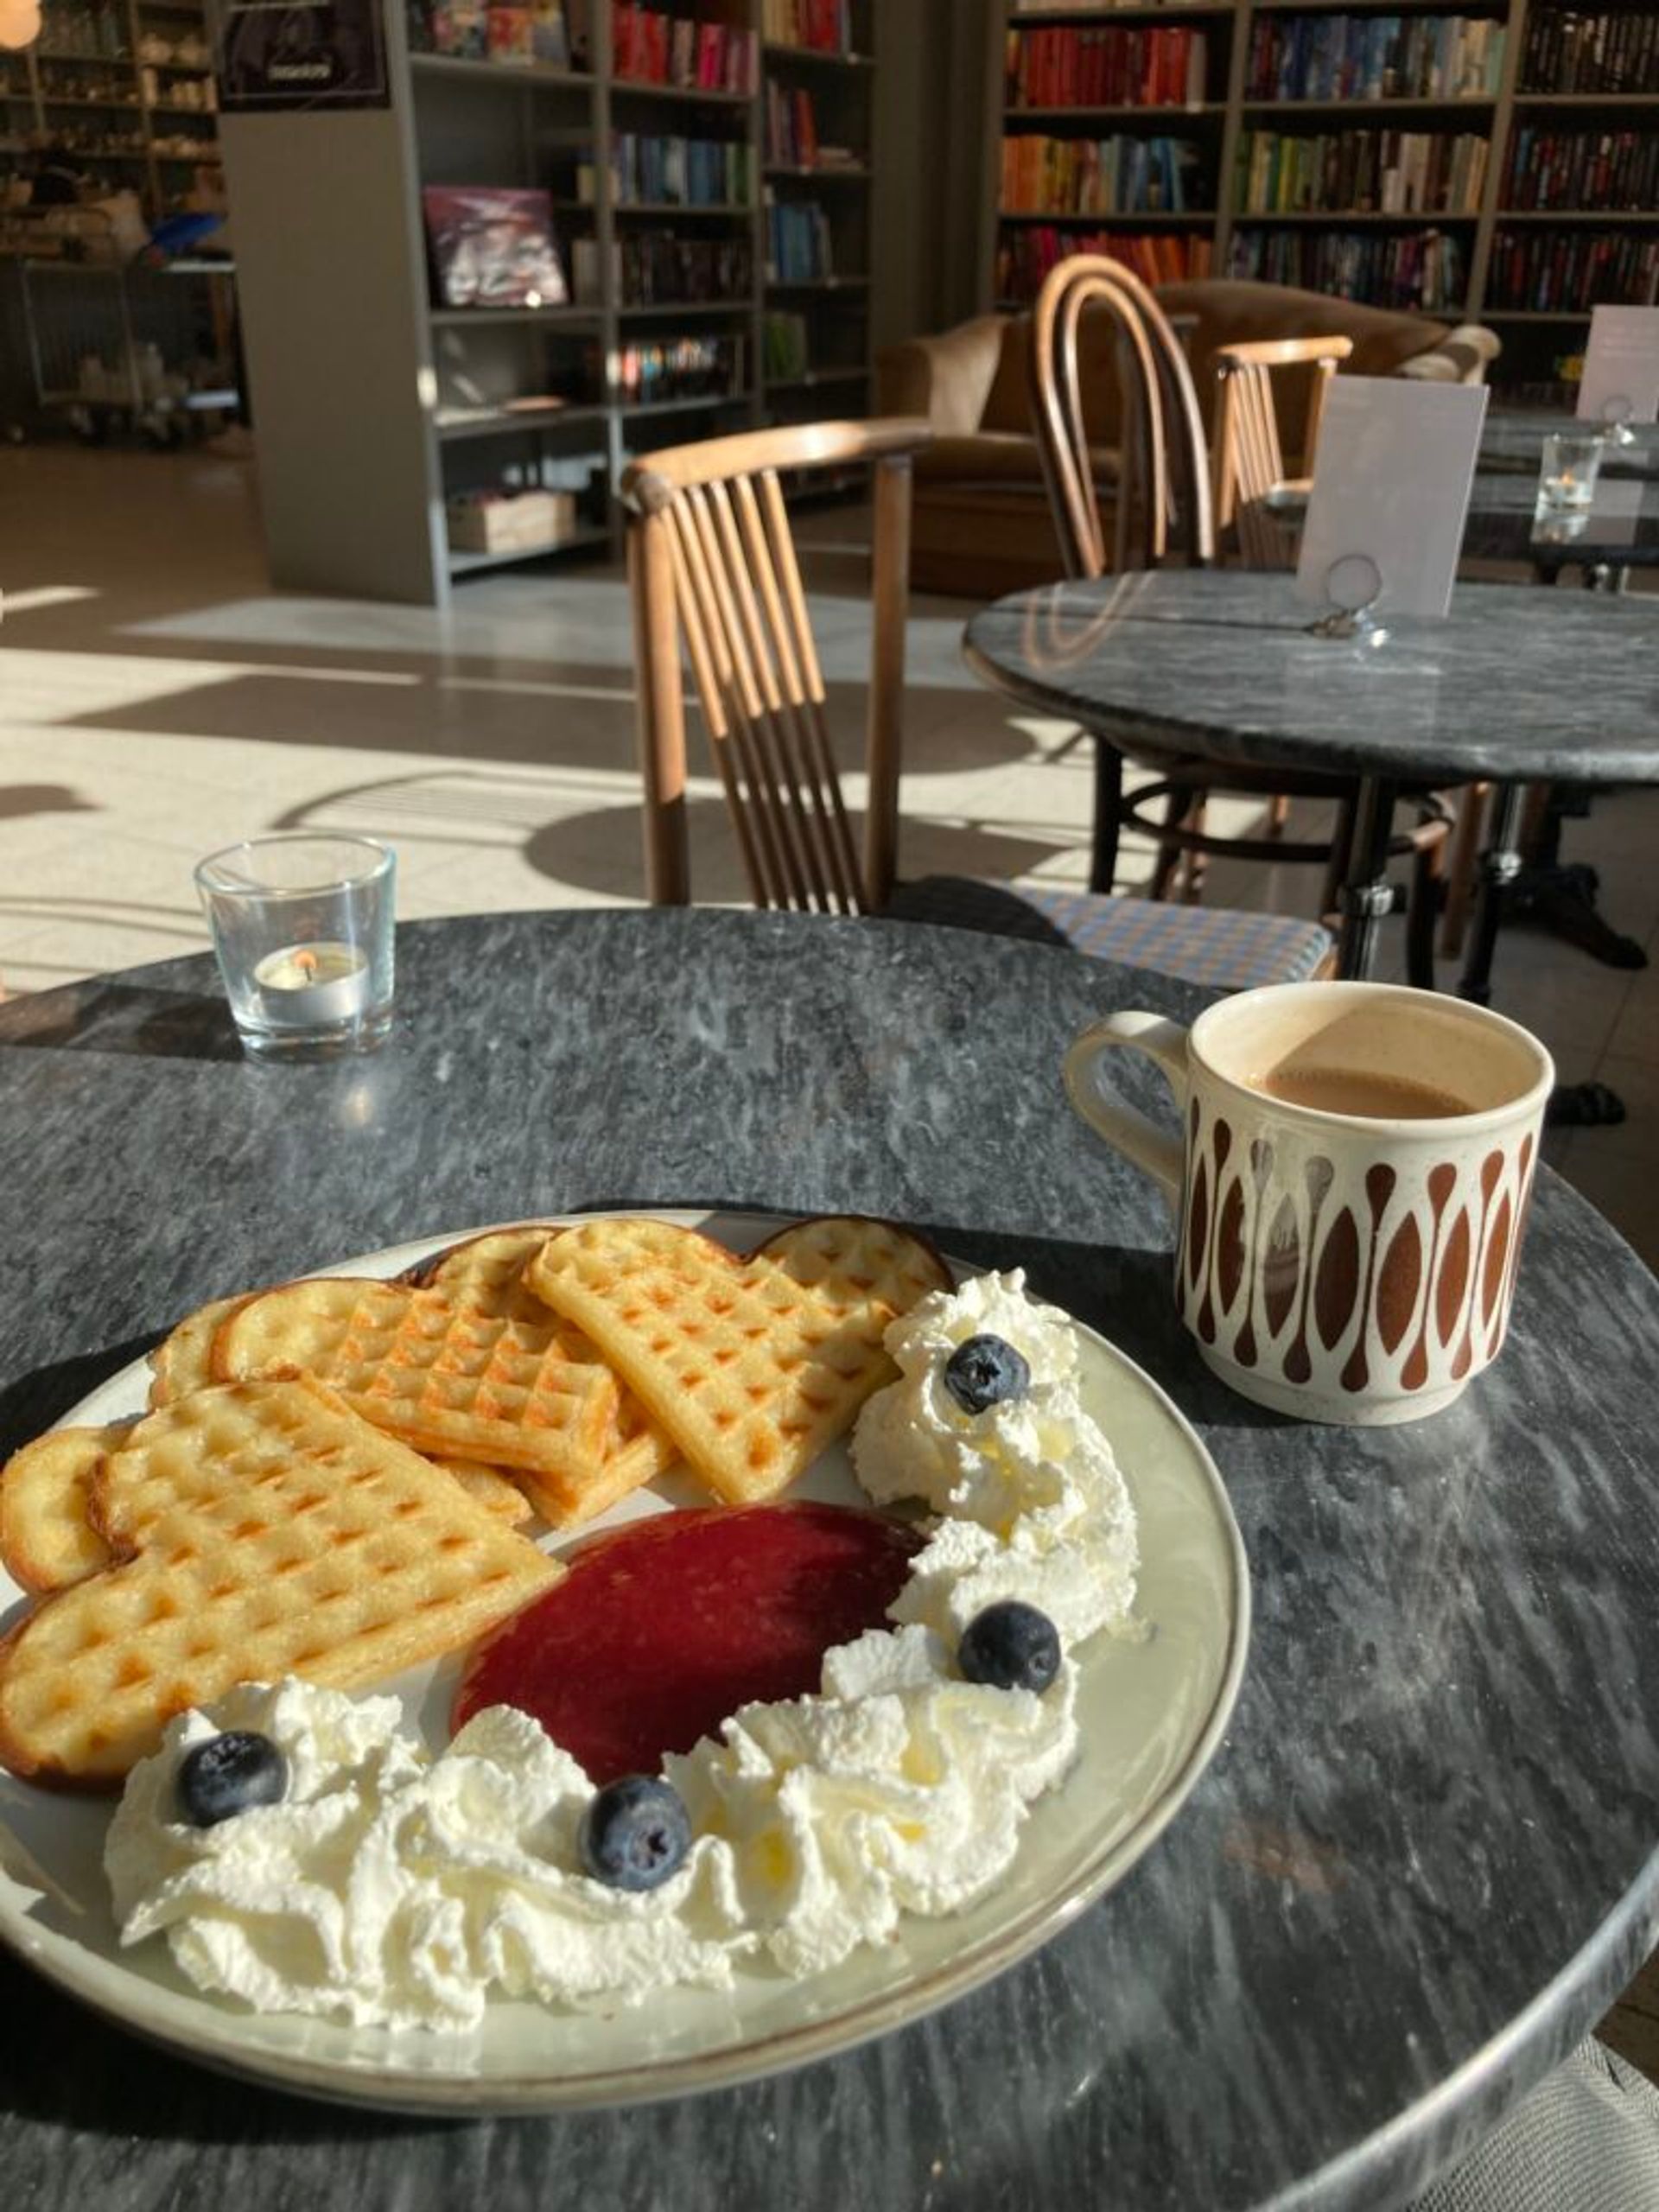 Heart-shaped waffles with whipped cream, blueberries, and jam, accompanied by a cup of coffee. The scene is set in a cozy indoor café.